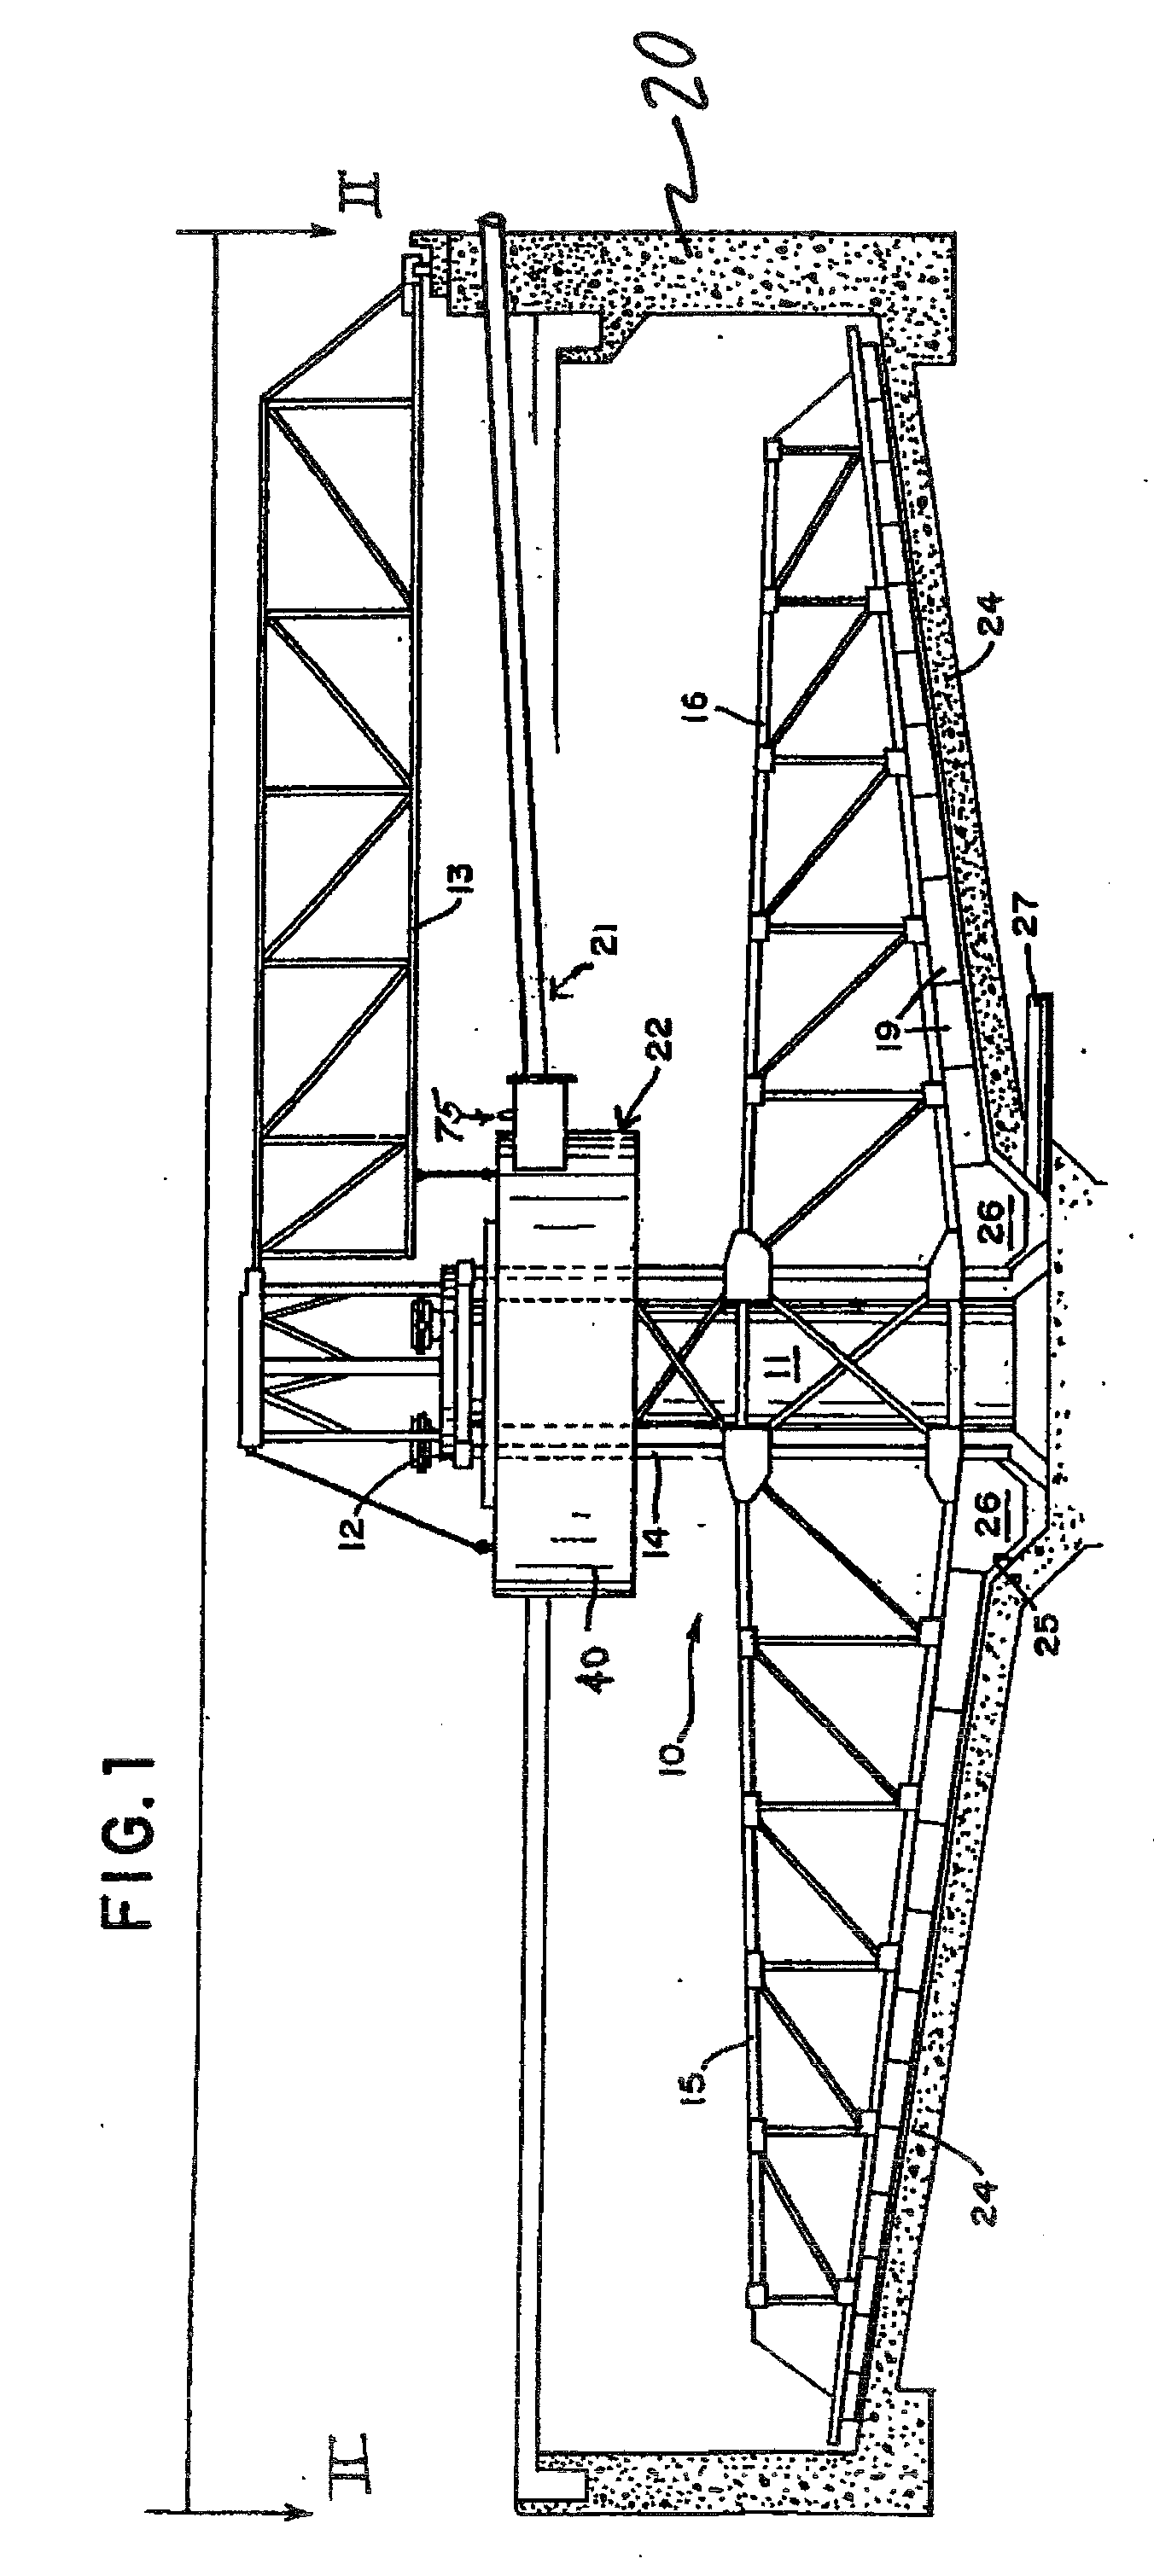 Open-channel feed dilution system for a thickener or settling tank